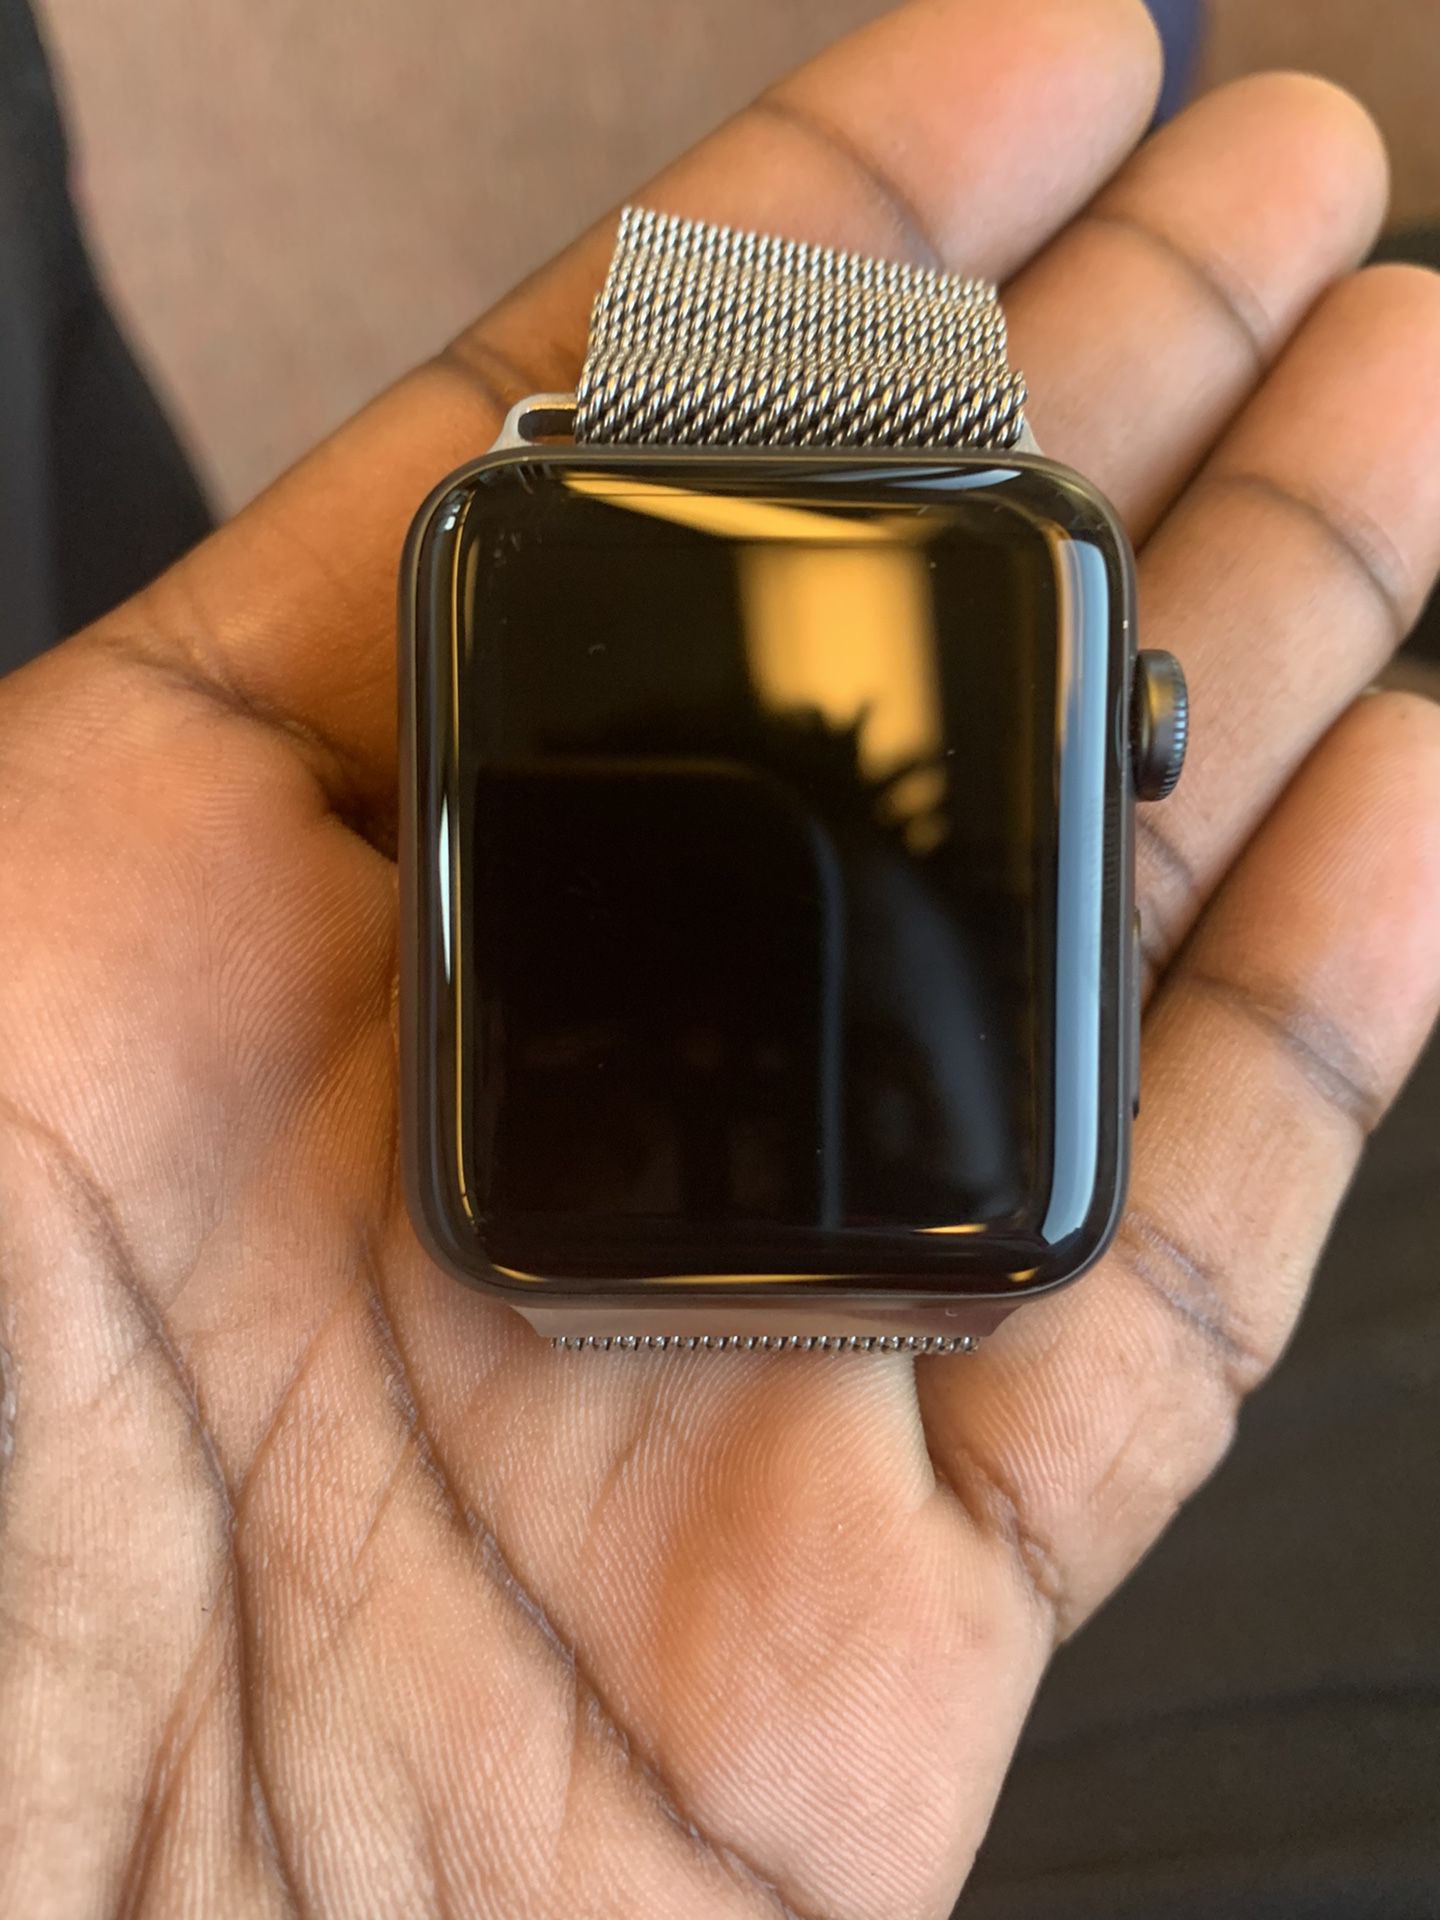 Apple 3 series brand new with stainless steel watch adjust band